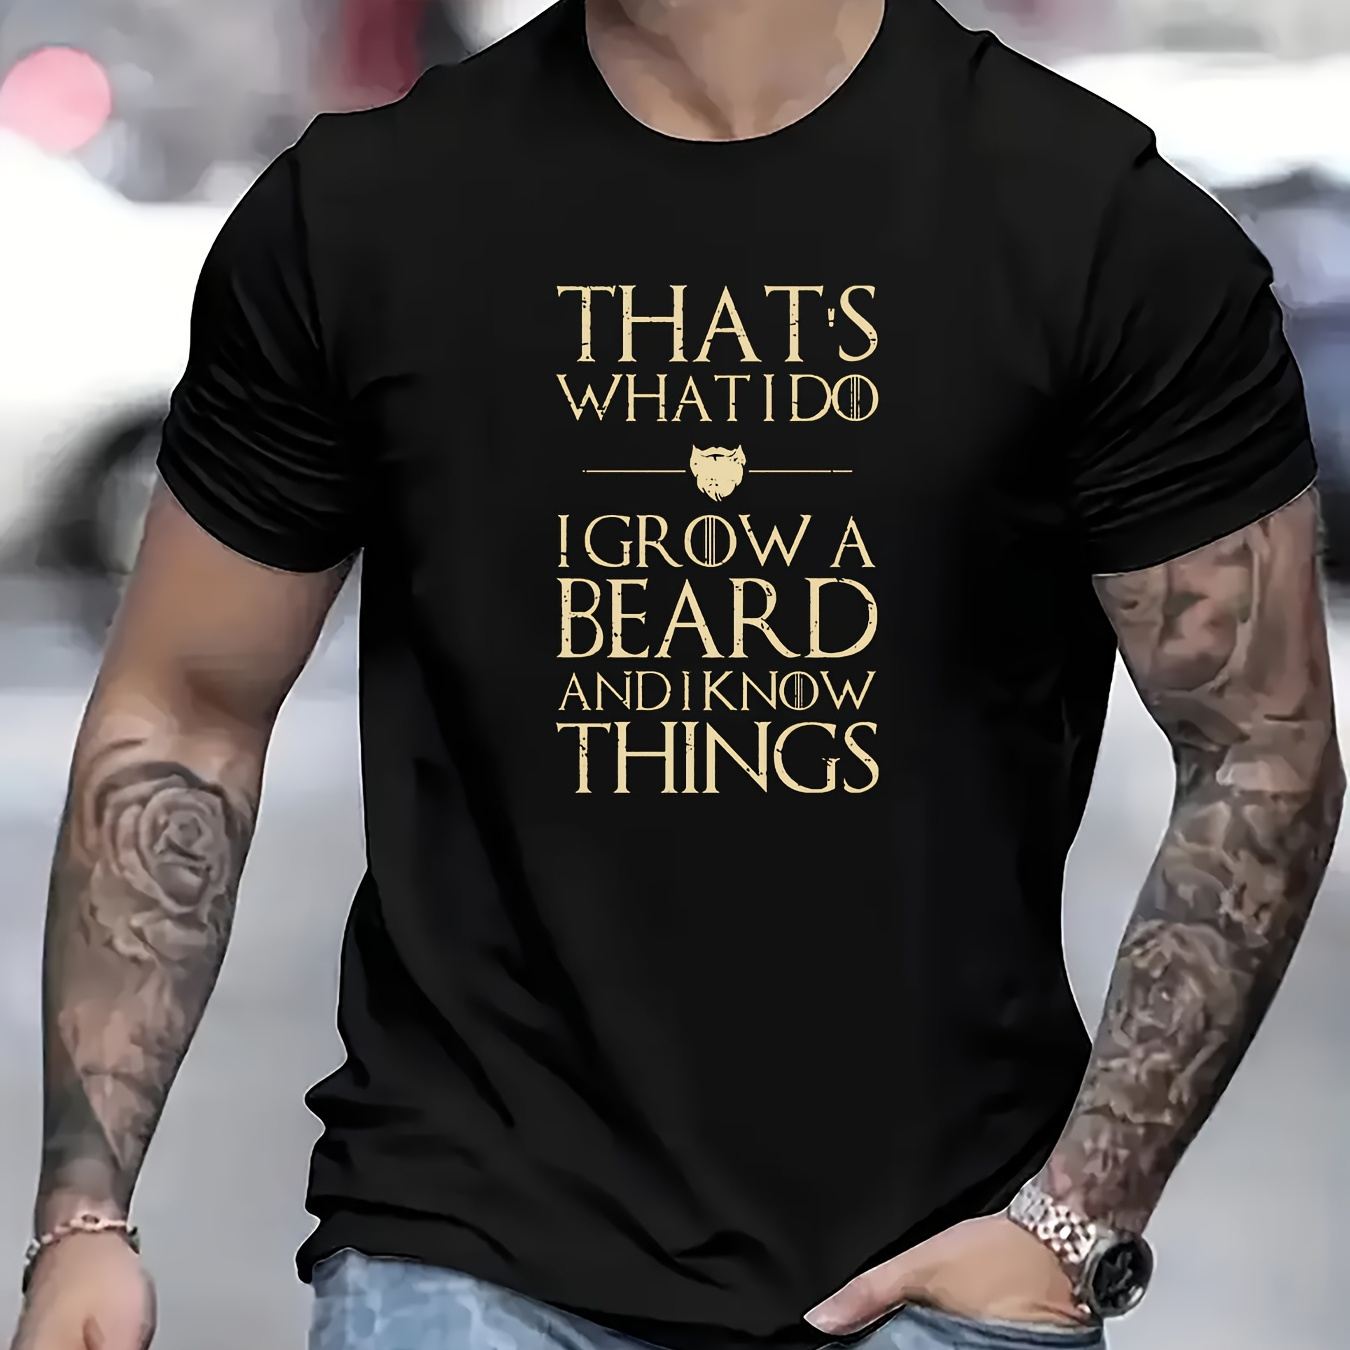 

I Grow A Beard And I Know Things Print T Shirt, Tees For Men, Casual Short Sleeve T-shirt For Summer